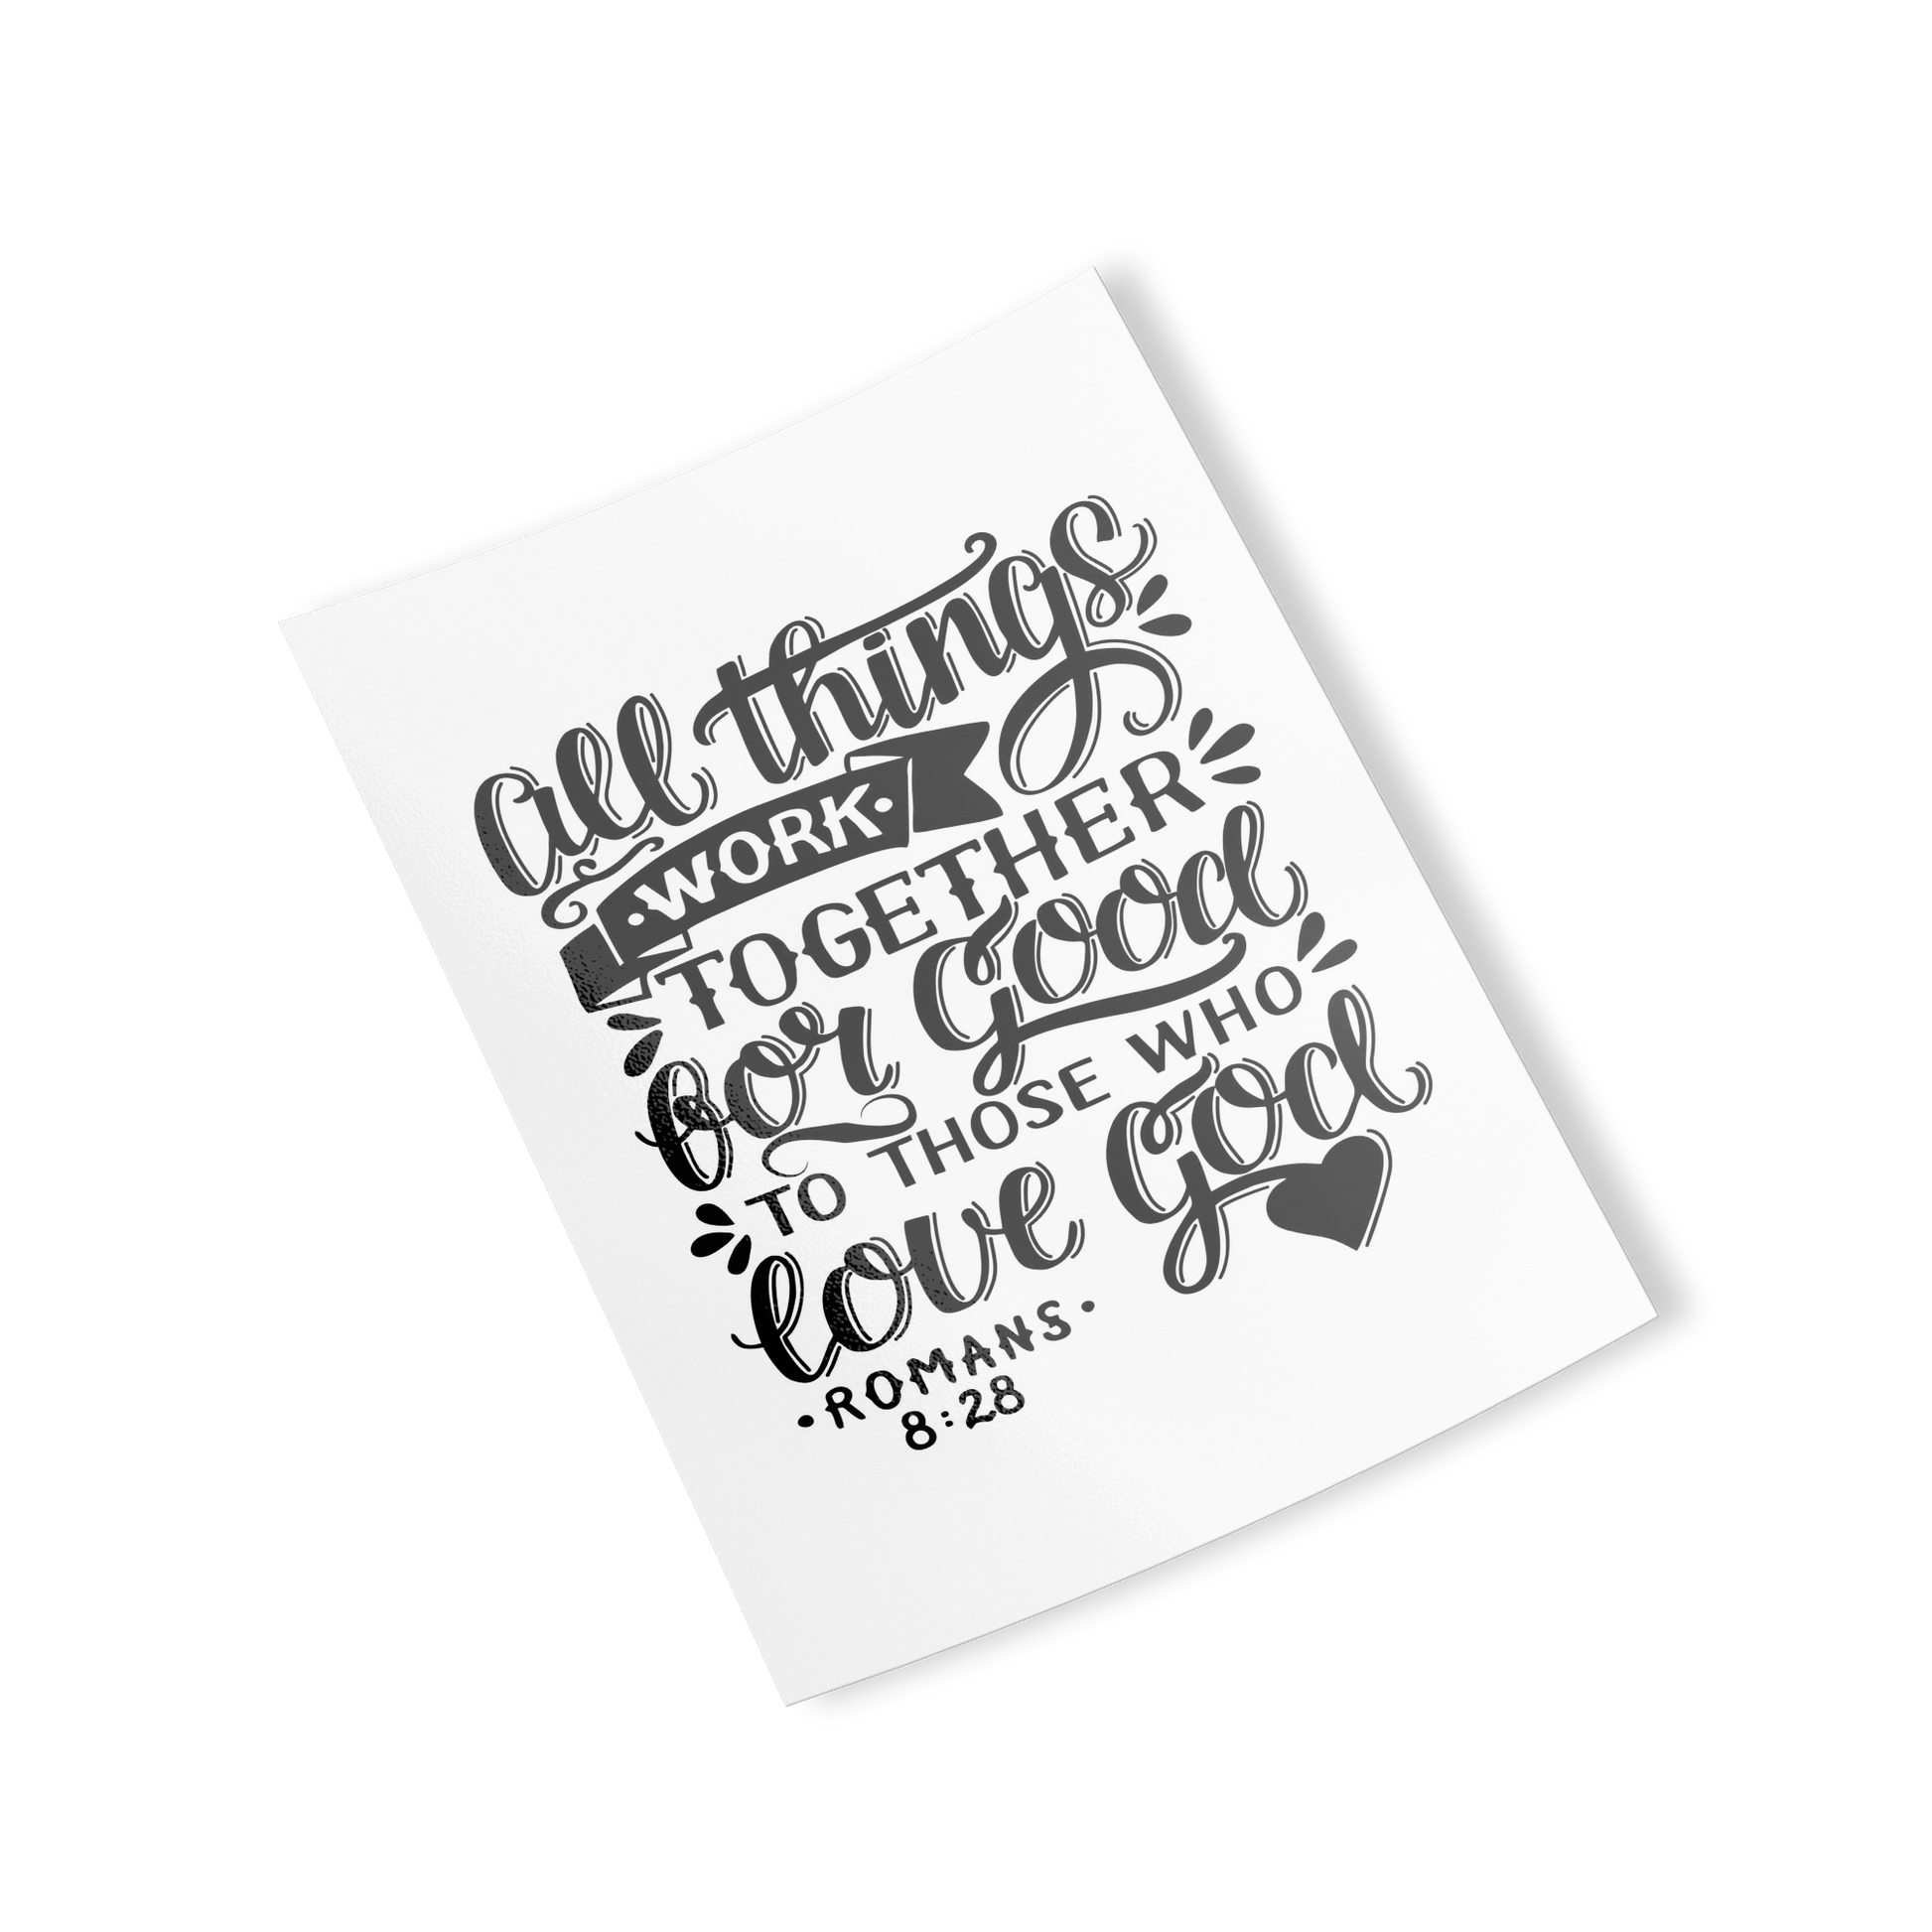 All Things Work Together For Good To Those Who Love God, Romans 8:28 - Black on White Rectangle Sticker diagonal